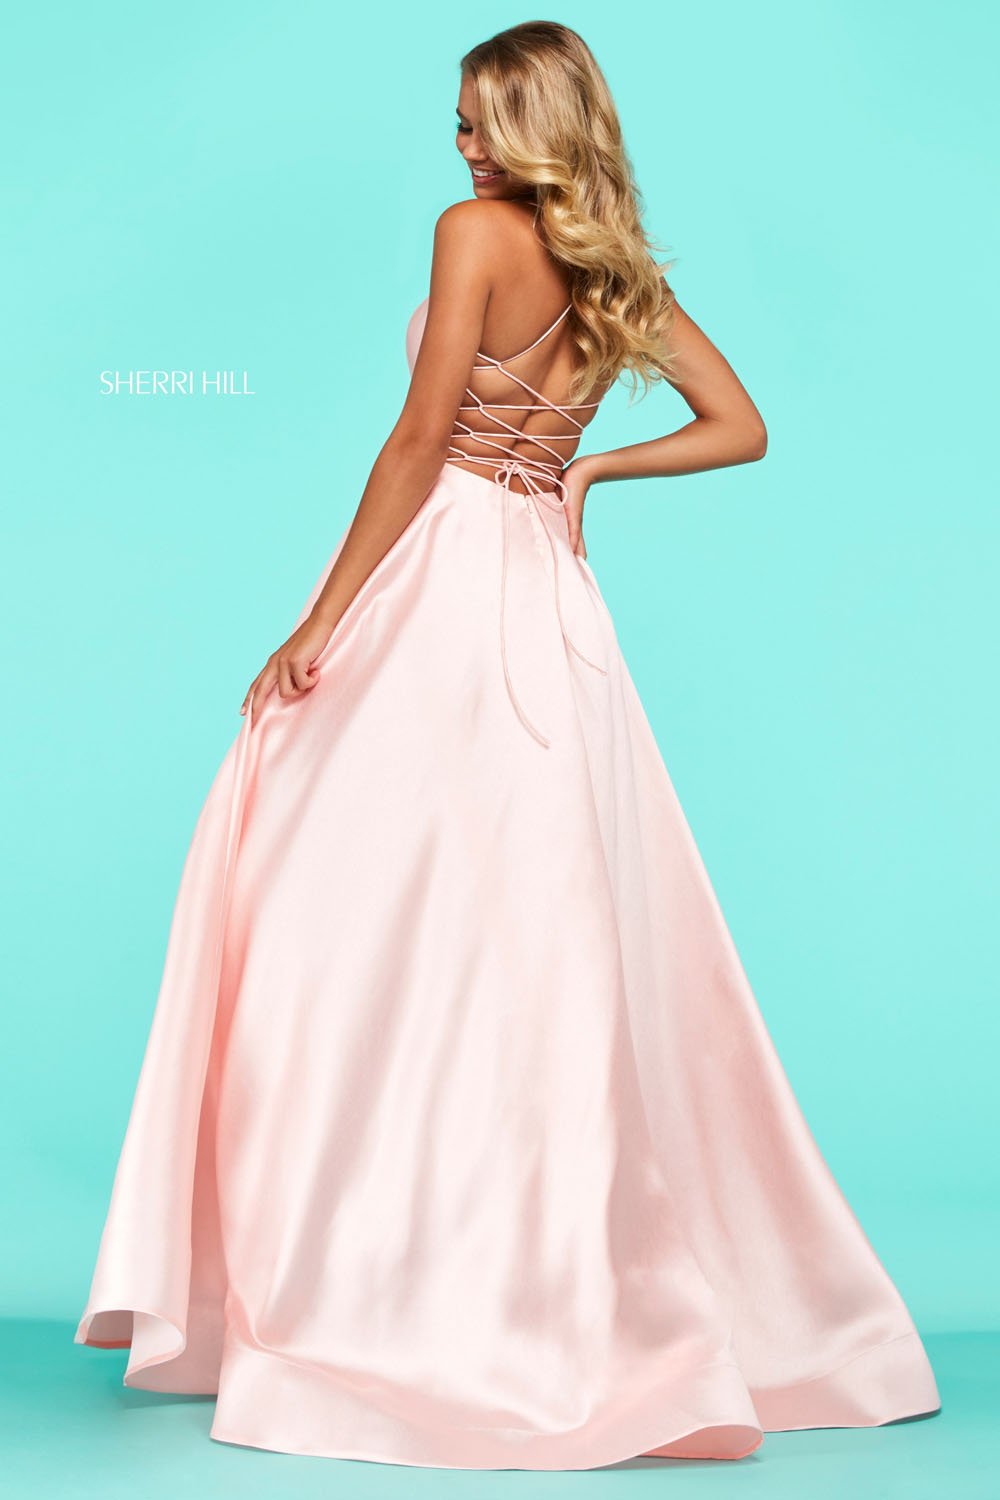 Sherri Hill 53661 dress images in these colors: Royal, Coral, Yellow, Red, Blush, Navy, Lilac, Fuchsia, Light Blue, Aqua, Emerald, Orange, Pink, Black.